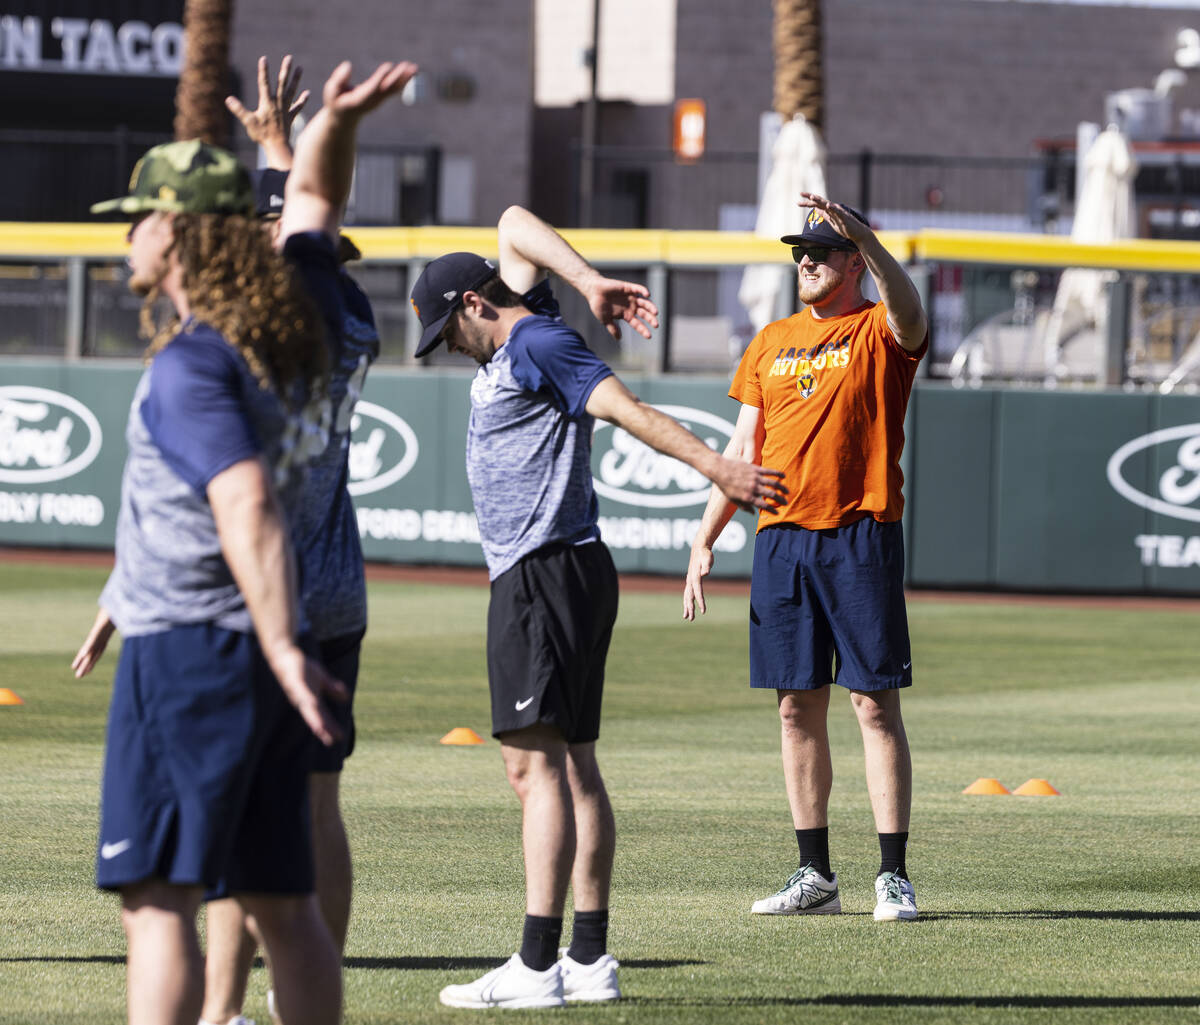 Aviator's pitcher Jared Koenig stretches during team's practice at Las Vegas Ballpark on Friday ...